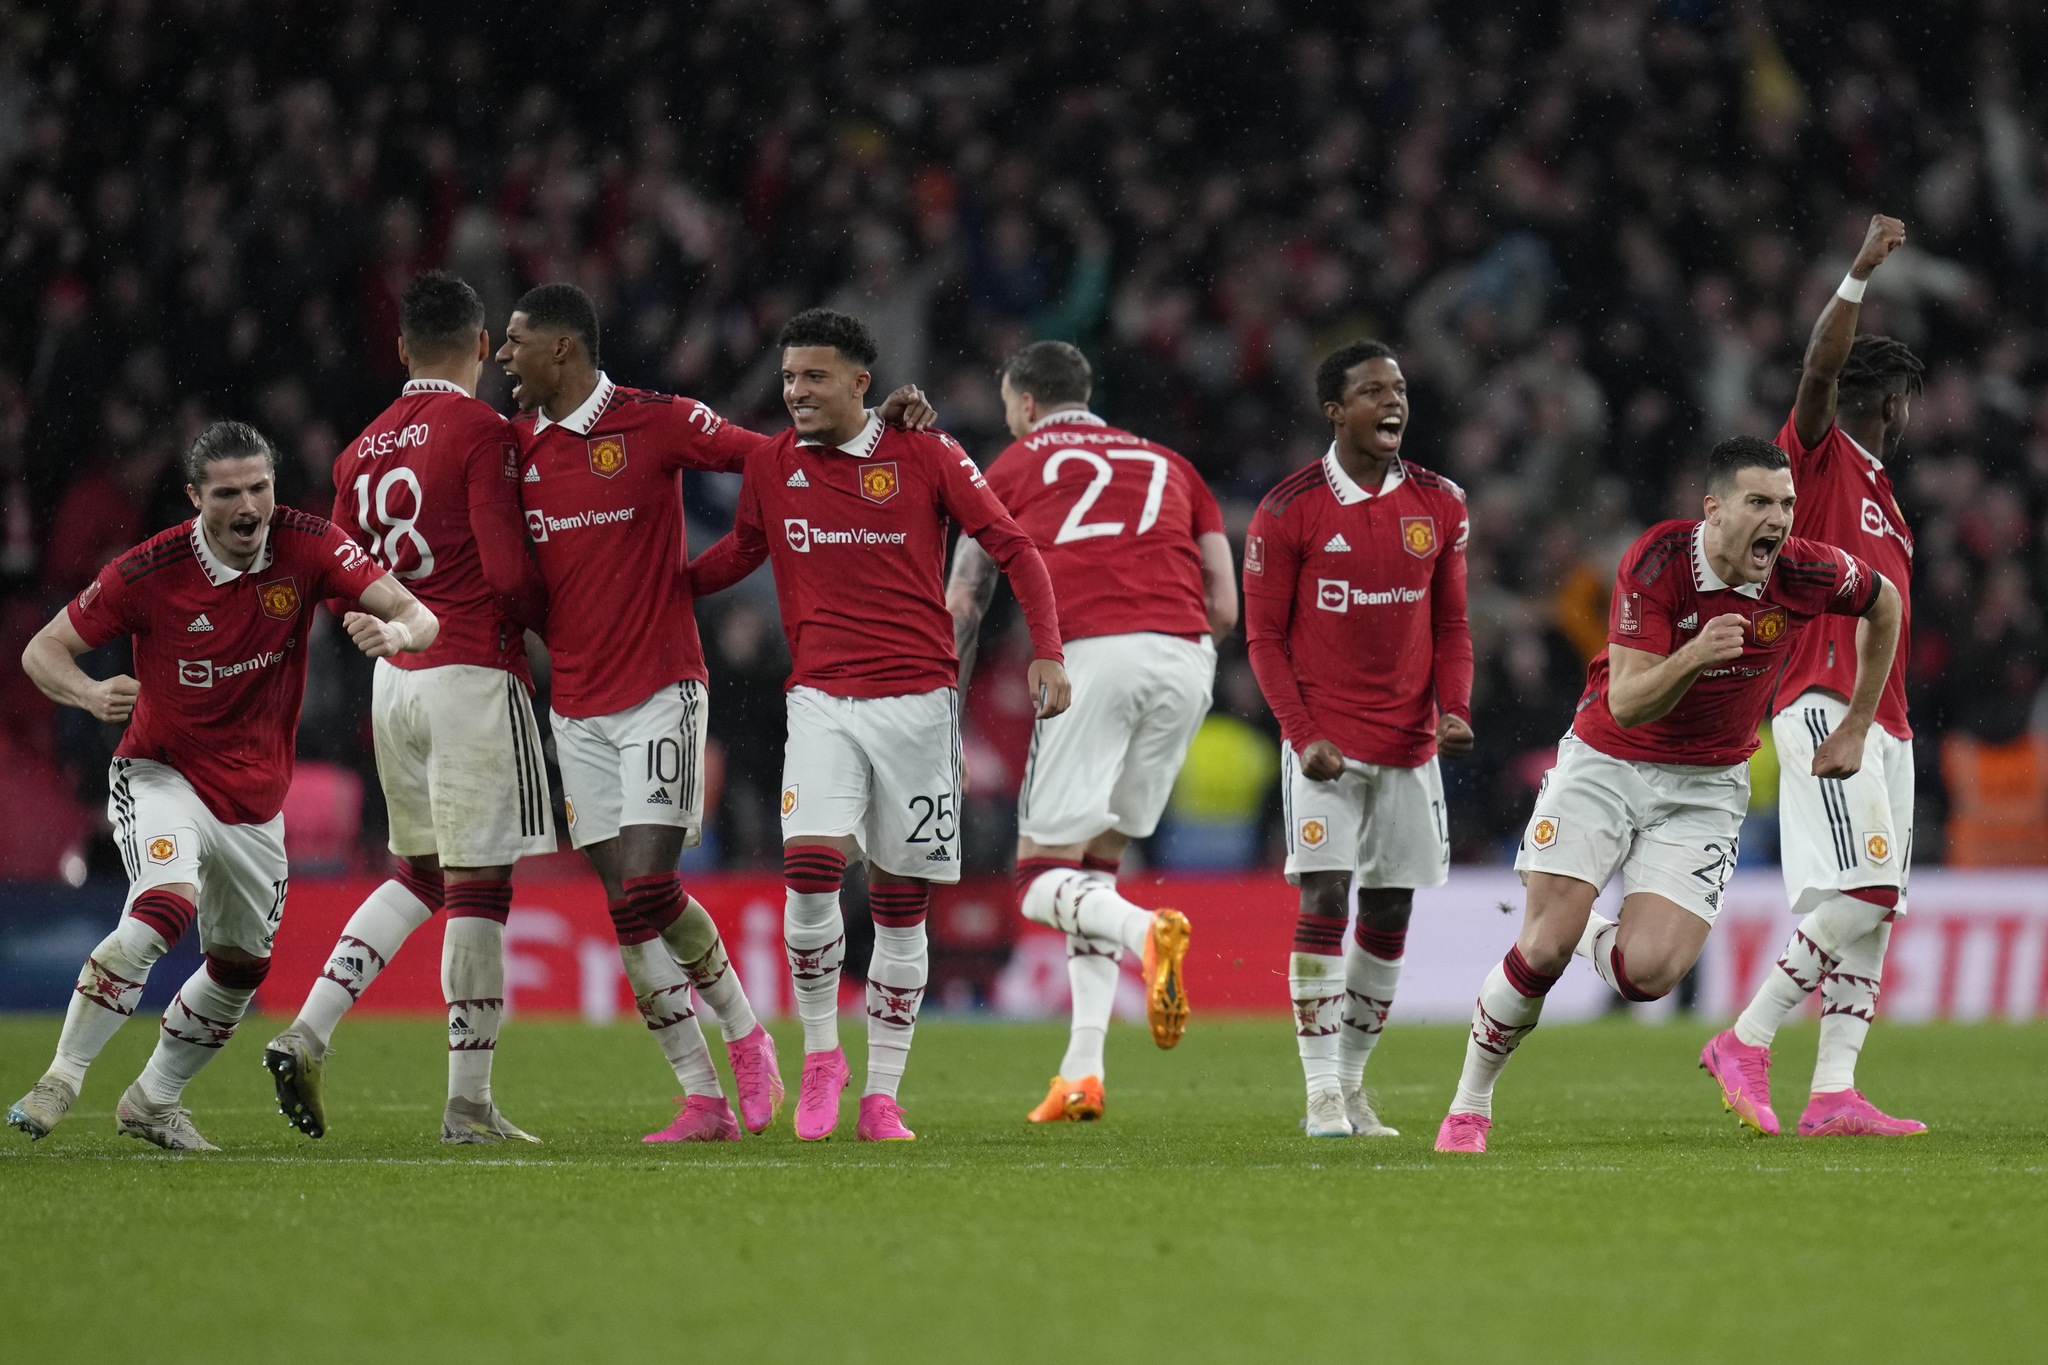 Manchester United players celebrate after winning on penalties.